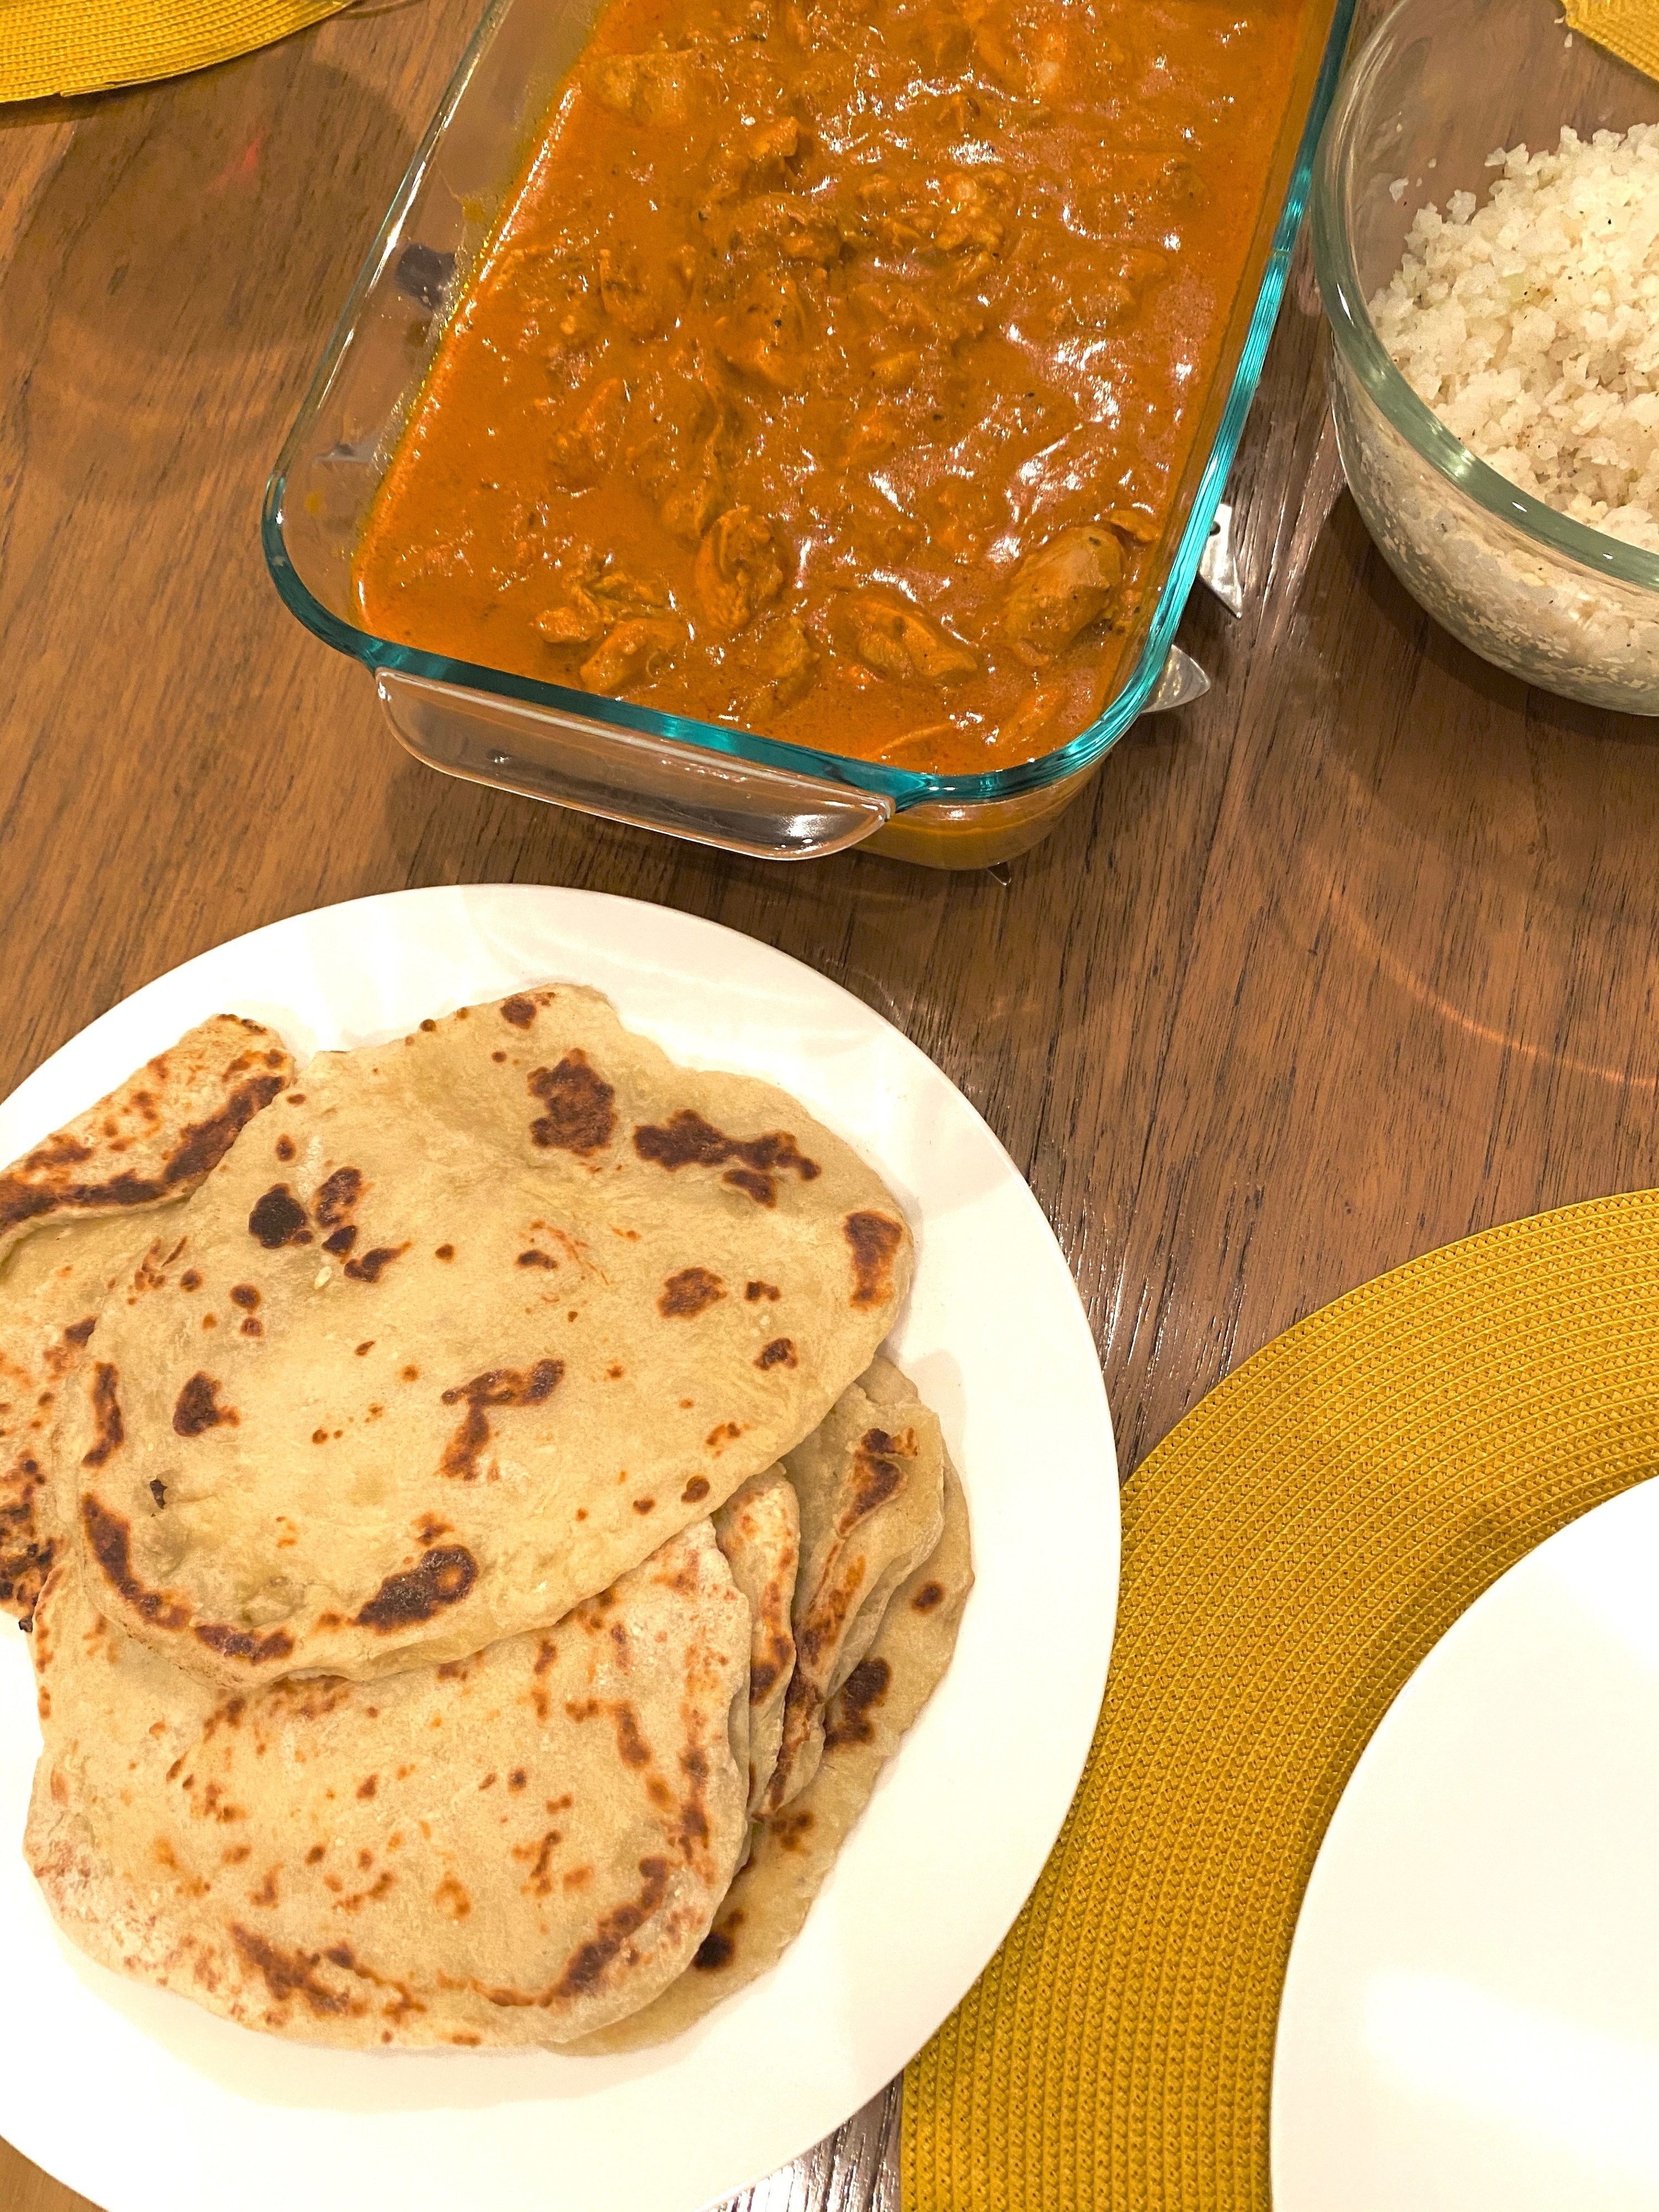 An Indian-inspired feast with homemade naan and chicken tikka masala.